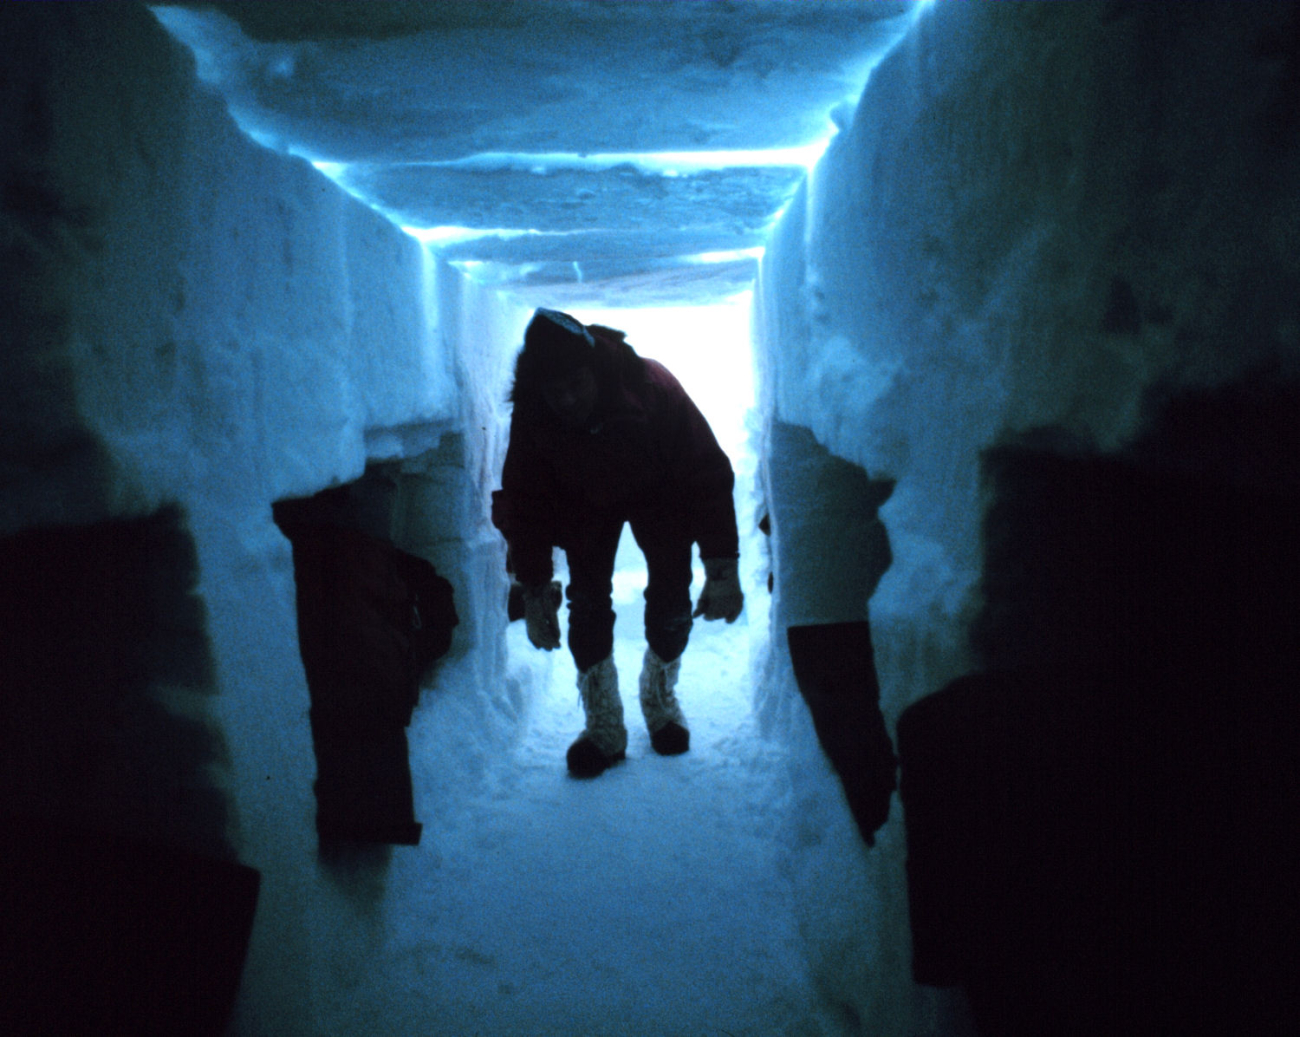 Coming into the ice shelter during survival training